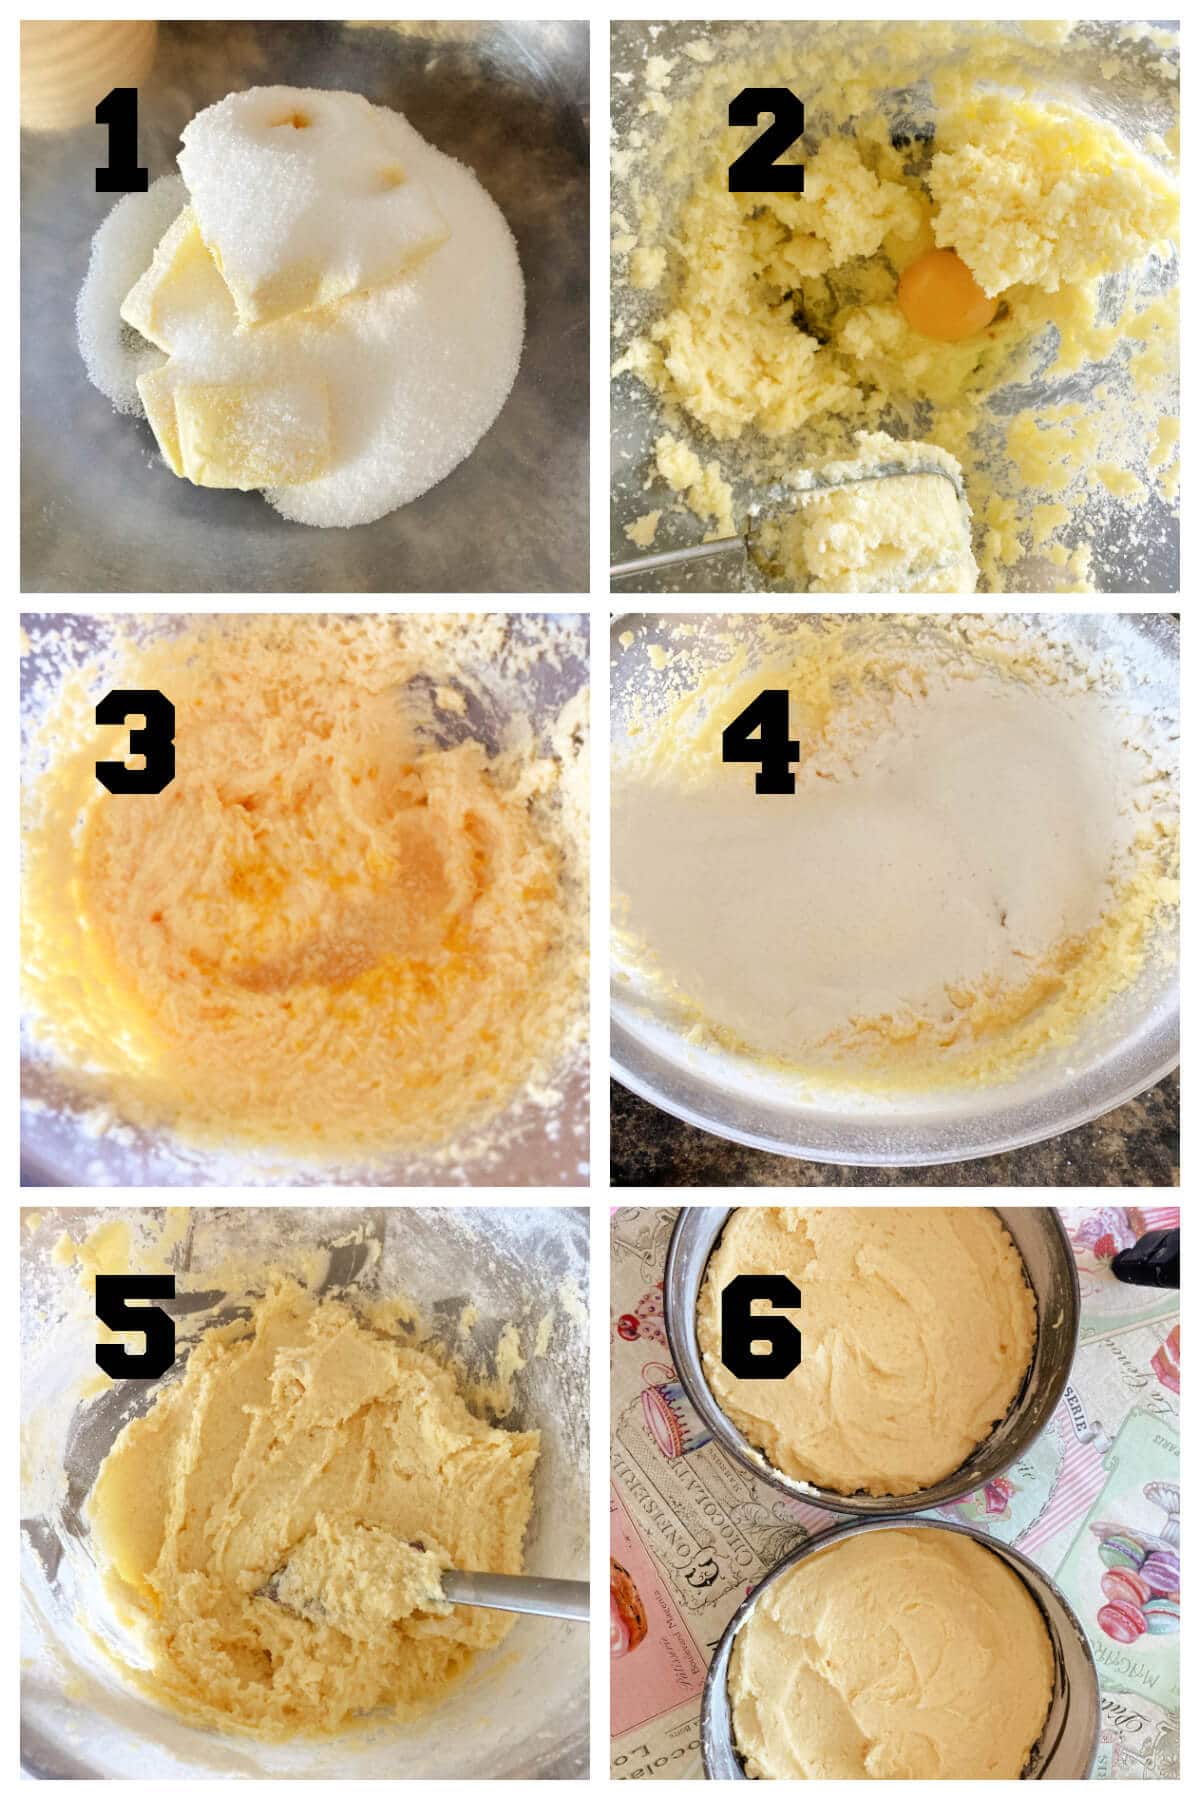 Collage of 6 photos to show how to make a lemon sponge.